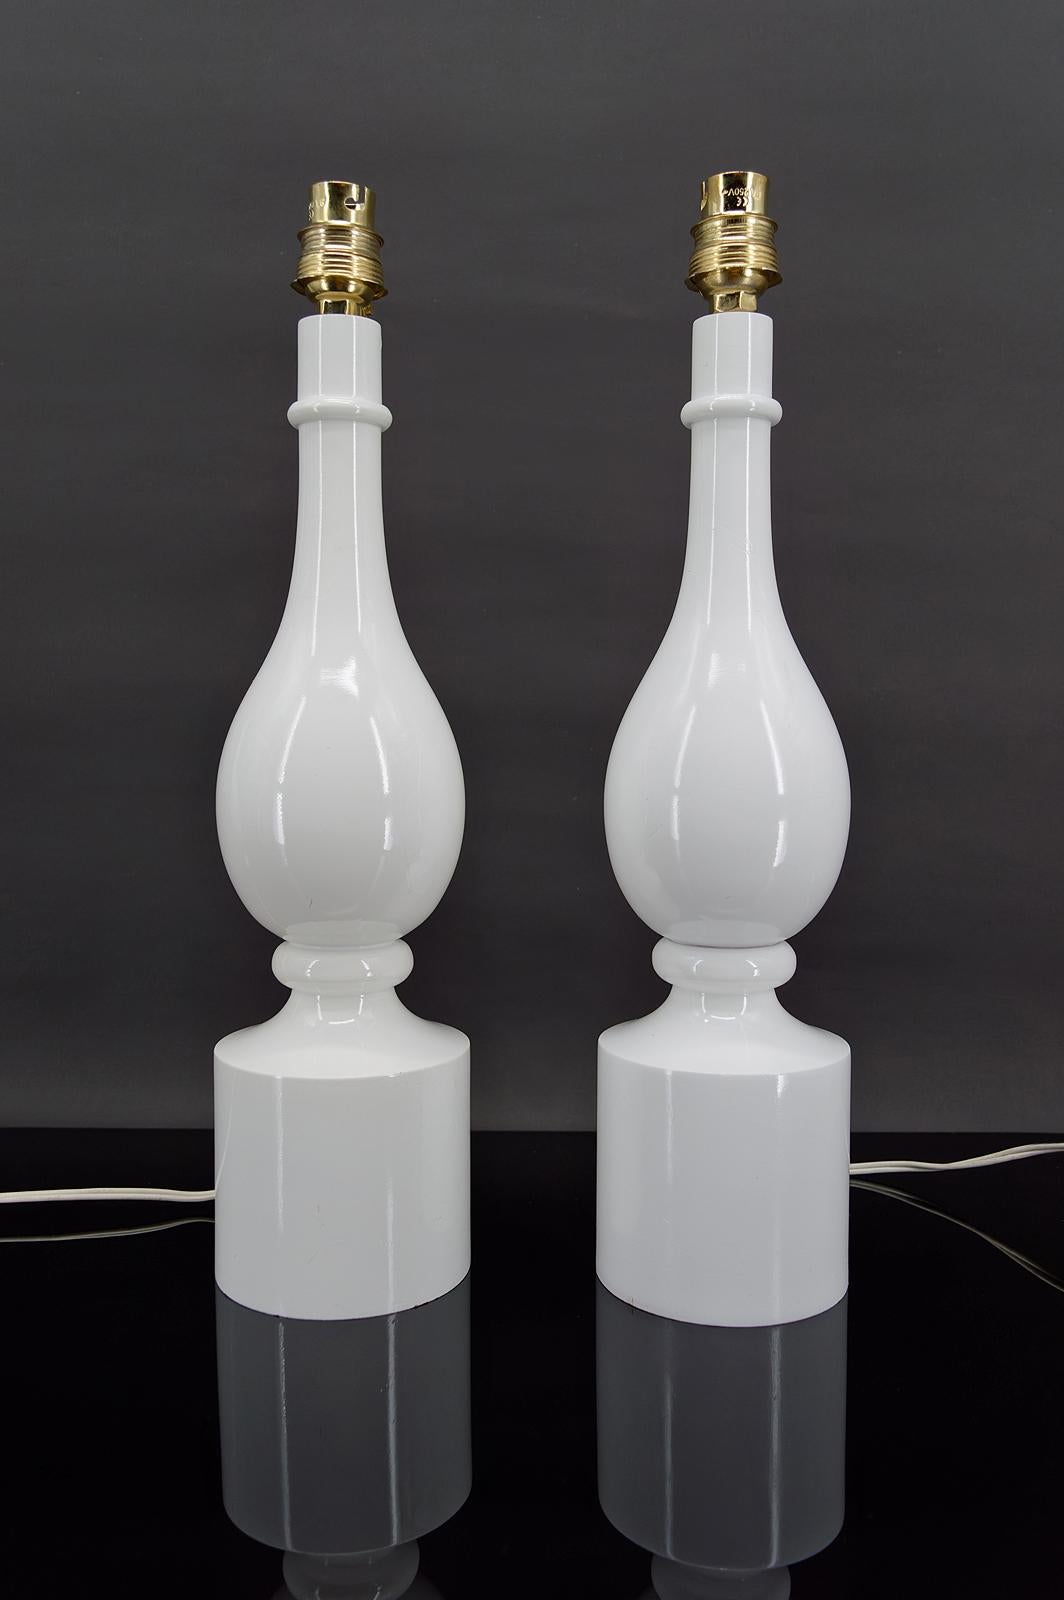 Pair of white lamps by Philippe Capelle
France, Circa 1970
Stamp under the base.

In white lacquered wood.
In very good condition, electricity OK.

Dimensions:
height 40 cm
diameter 10 cm